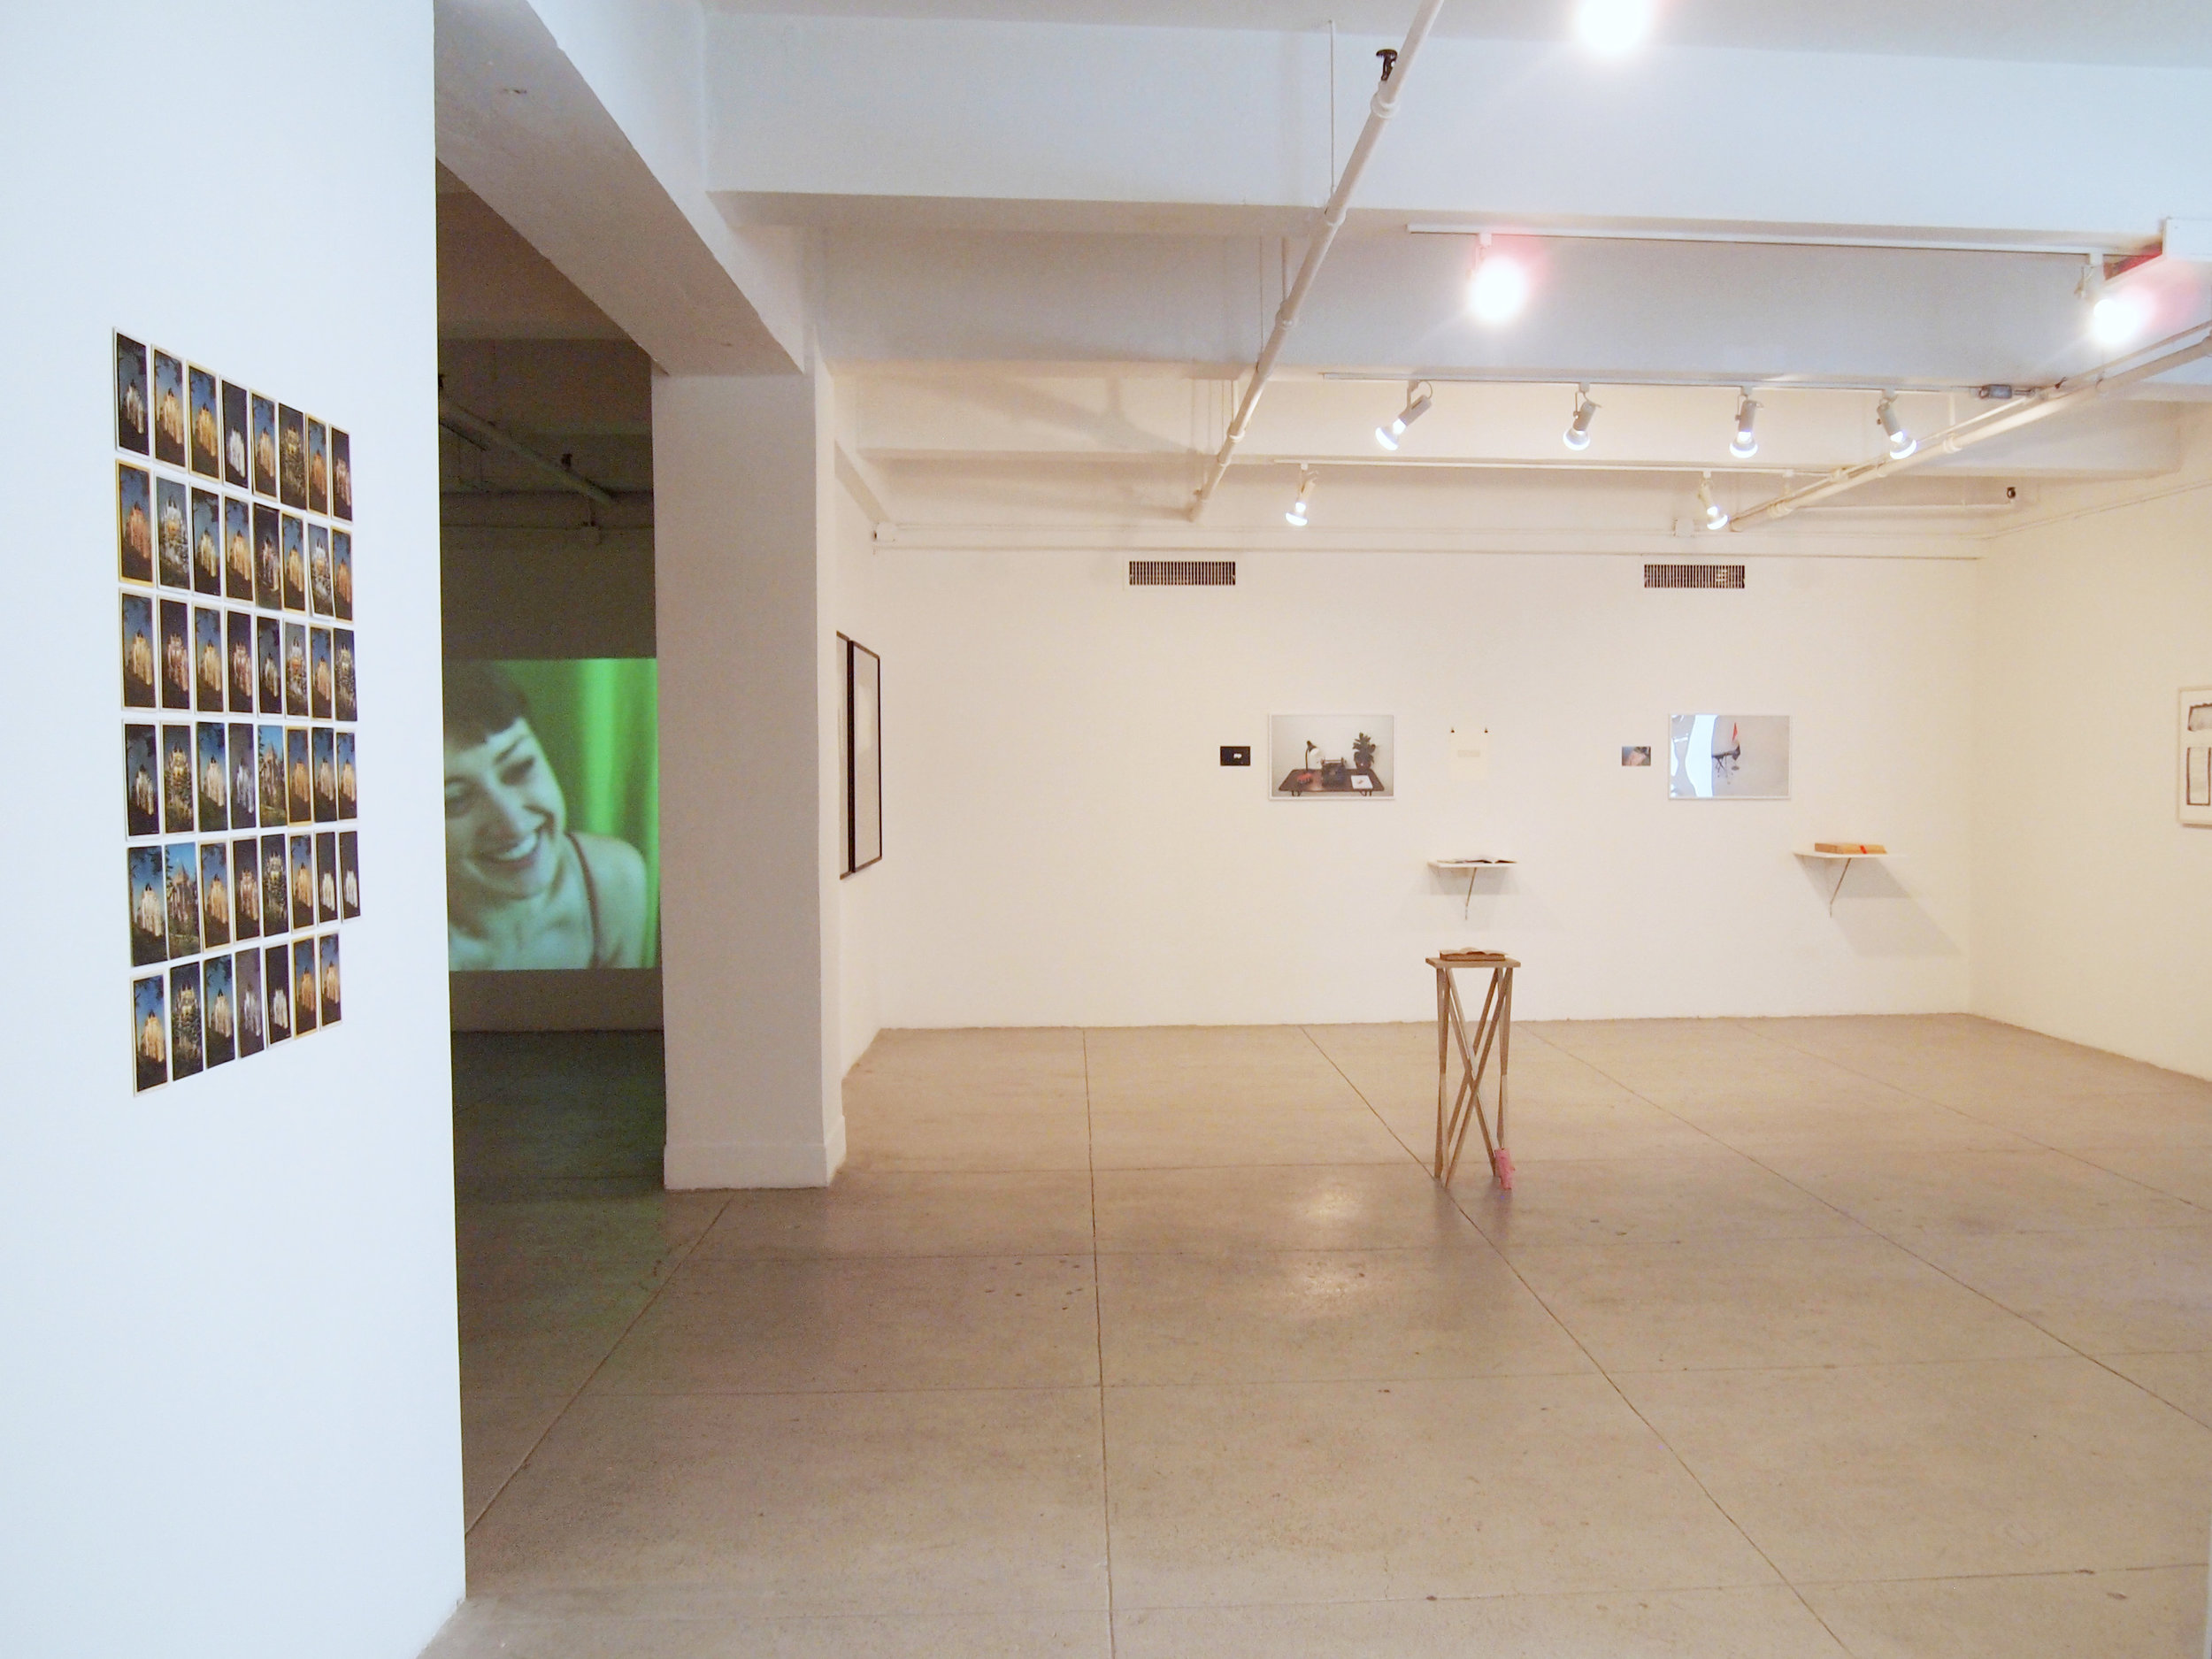   Last Year at Marienbad redux &nbsp;with work by Tacita Dean in the foreground, a video by Keren Cytter in the left background, and arrangements by Josh Tonsfeldt and work by Iman Issa on the right. 